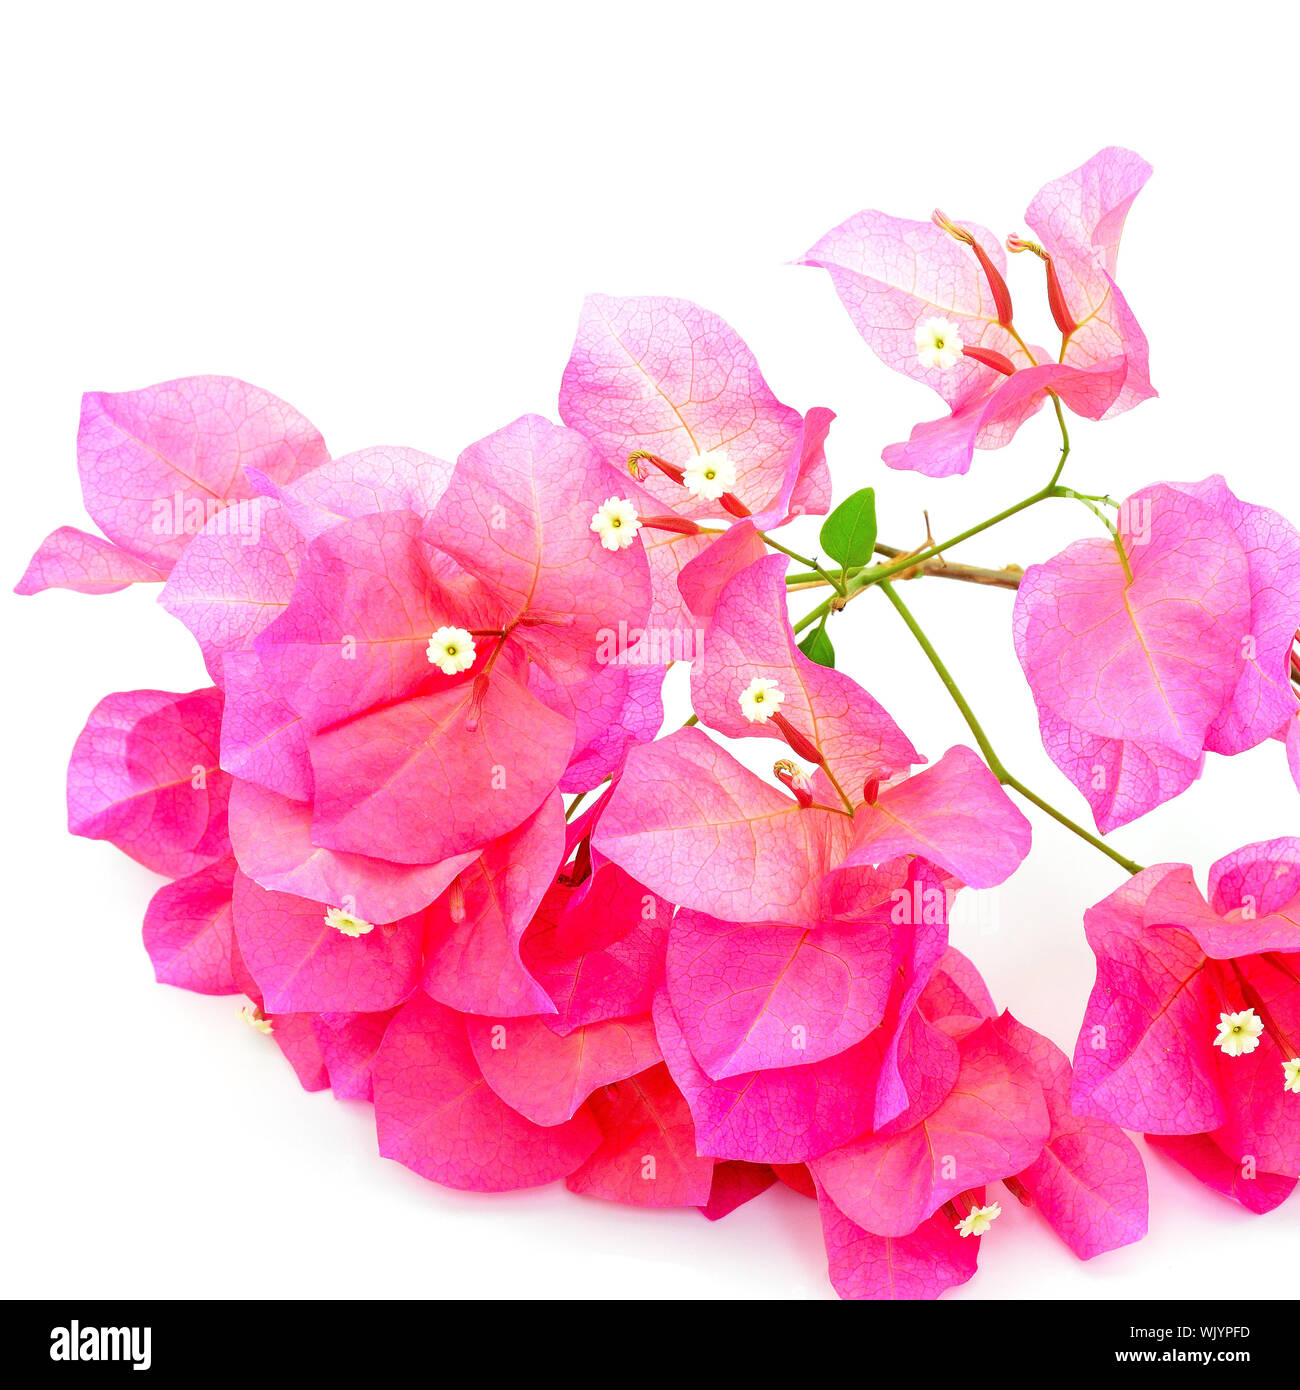 Tropical Bougainvillea flower, isolated on a white background Stock Photo